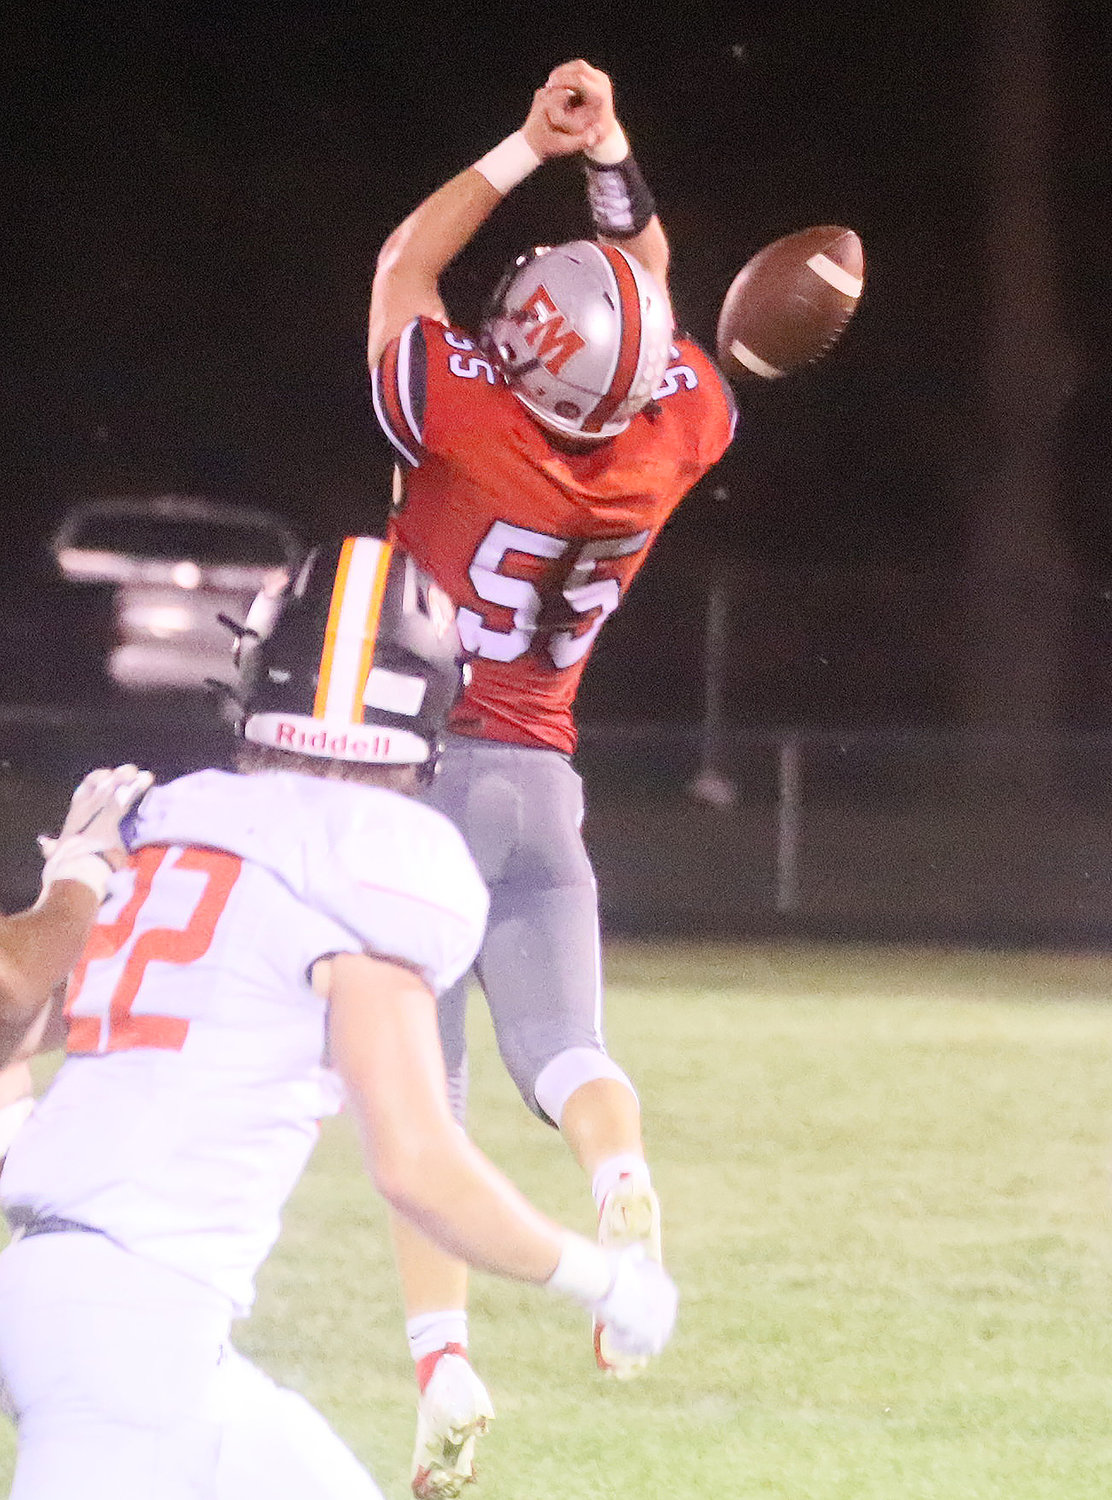 Tanner Settles (55) just misses picking off an Ethan Patterson pass in the first half Friday night. In the second half Settles would knock down a pass that was intercepted by the Hounds.